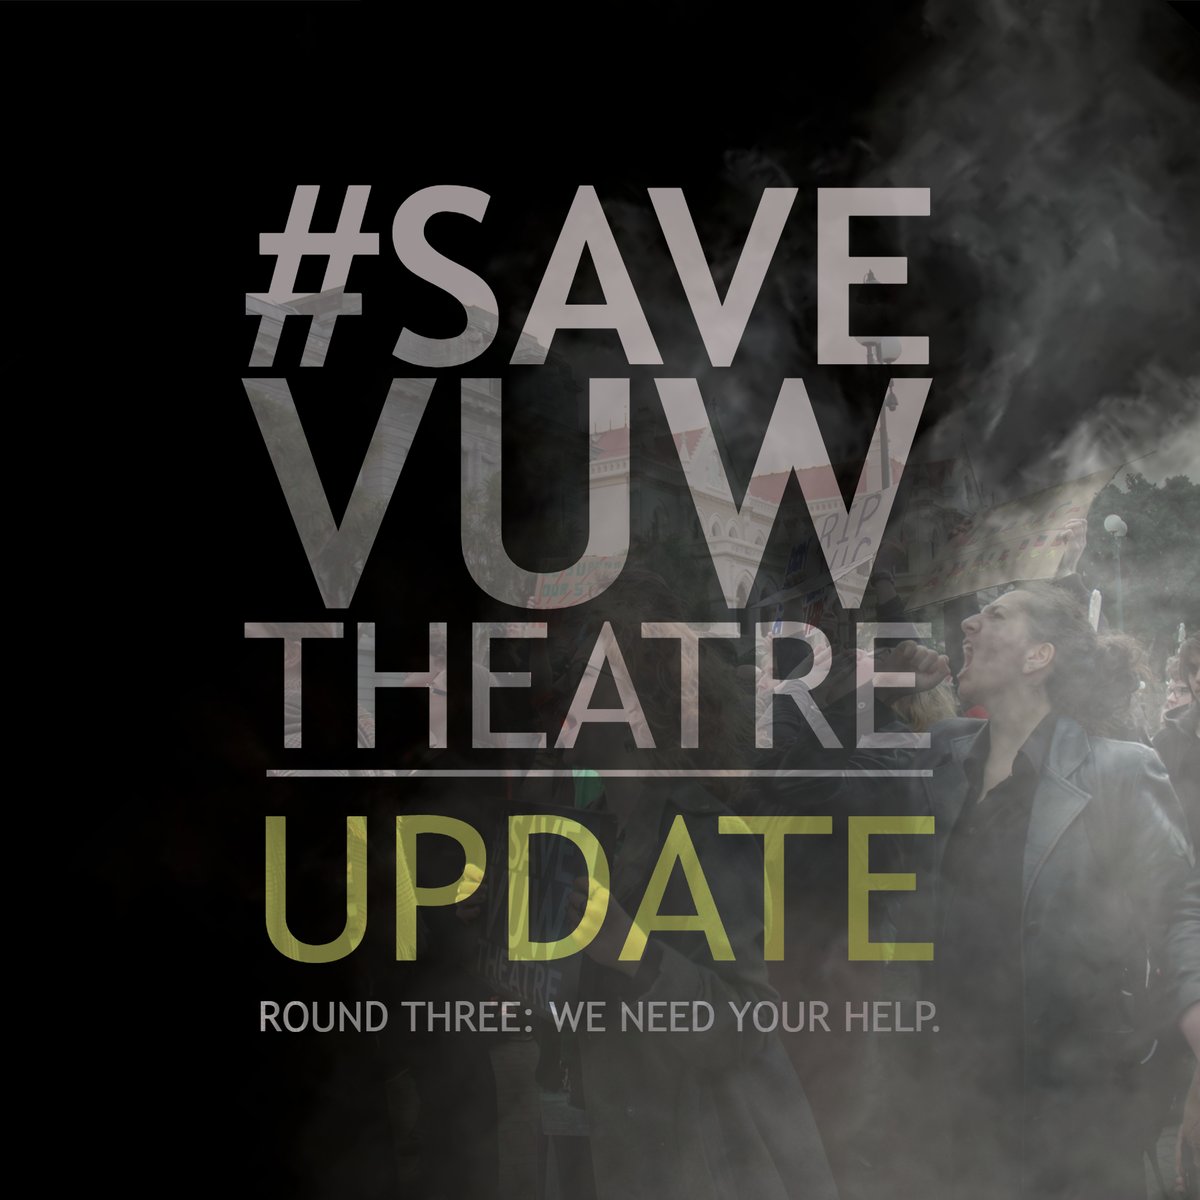 Important #saveVUWtheatre update. This week we got an updated change proposal. There was NO change - management are still proposing to cut half the staff and end theatre as a standalone programme. But we're fighting back, and the show isn't over yet. Here's how you can help -